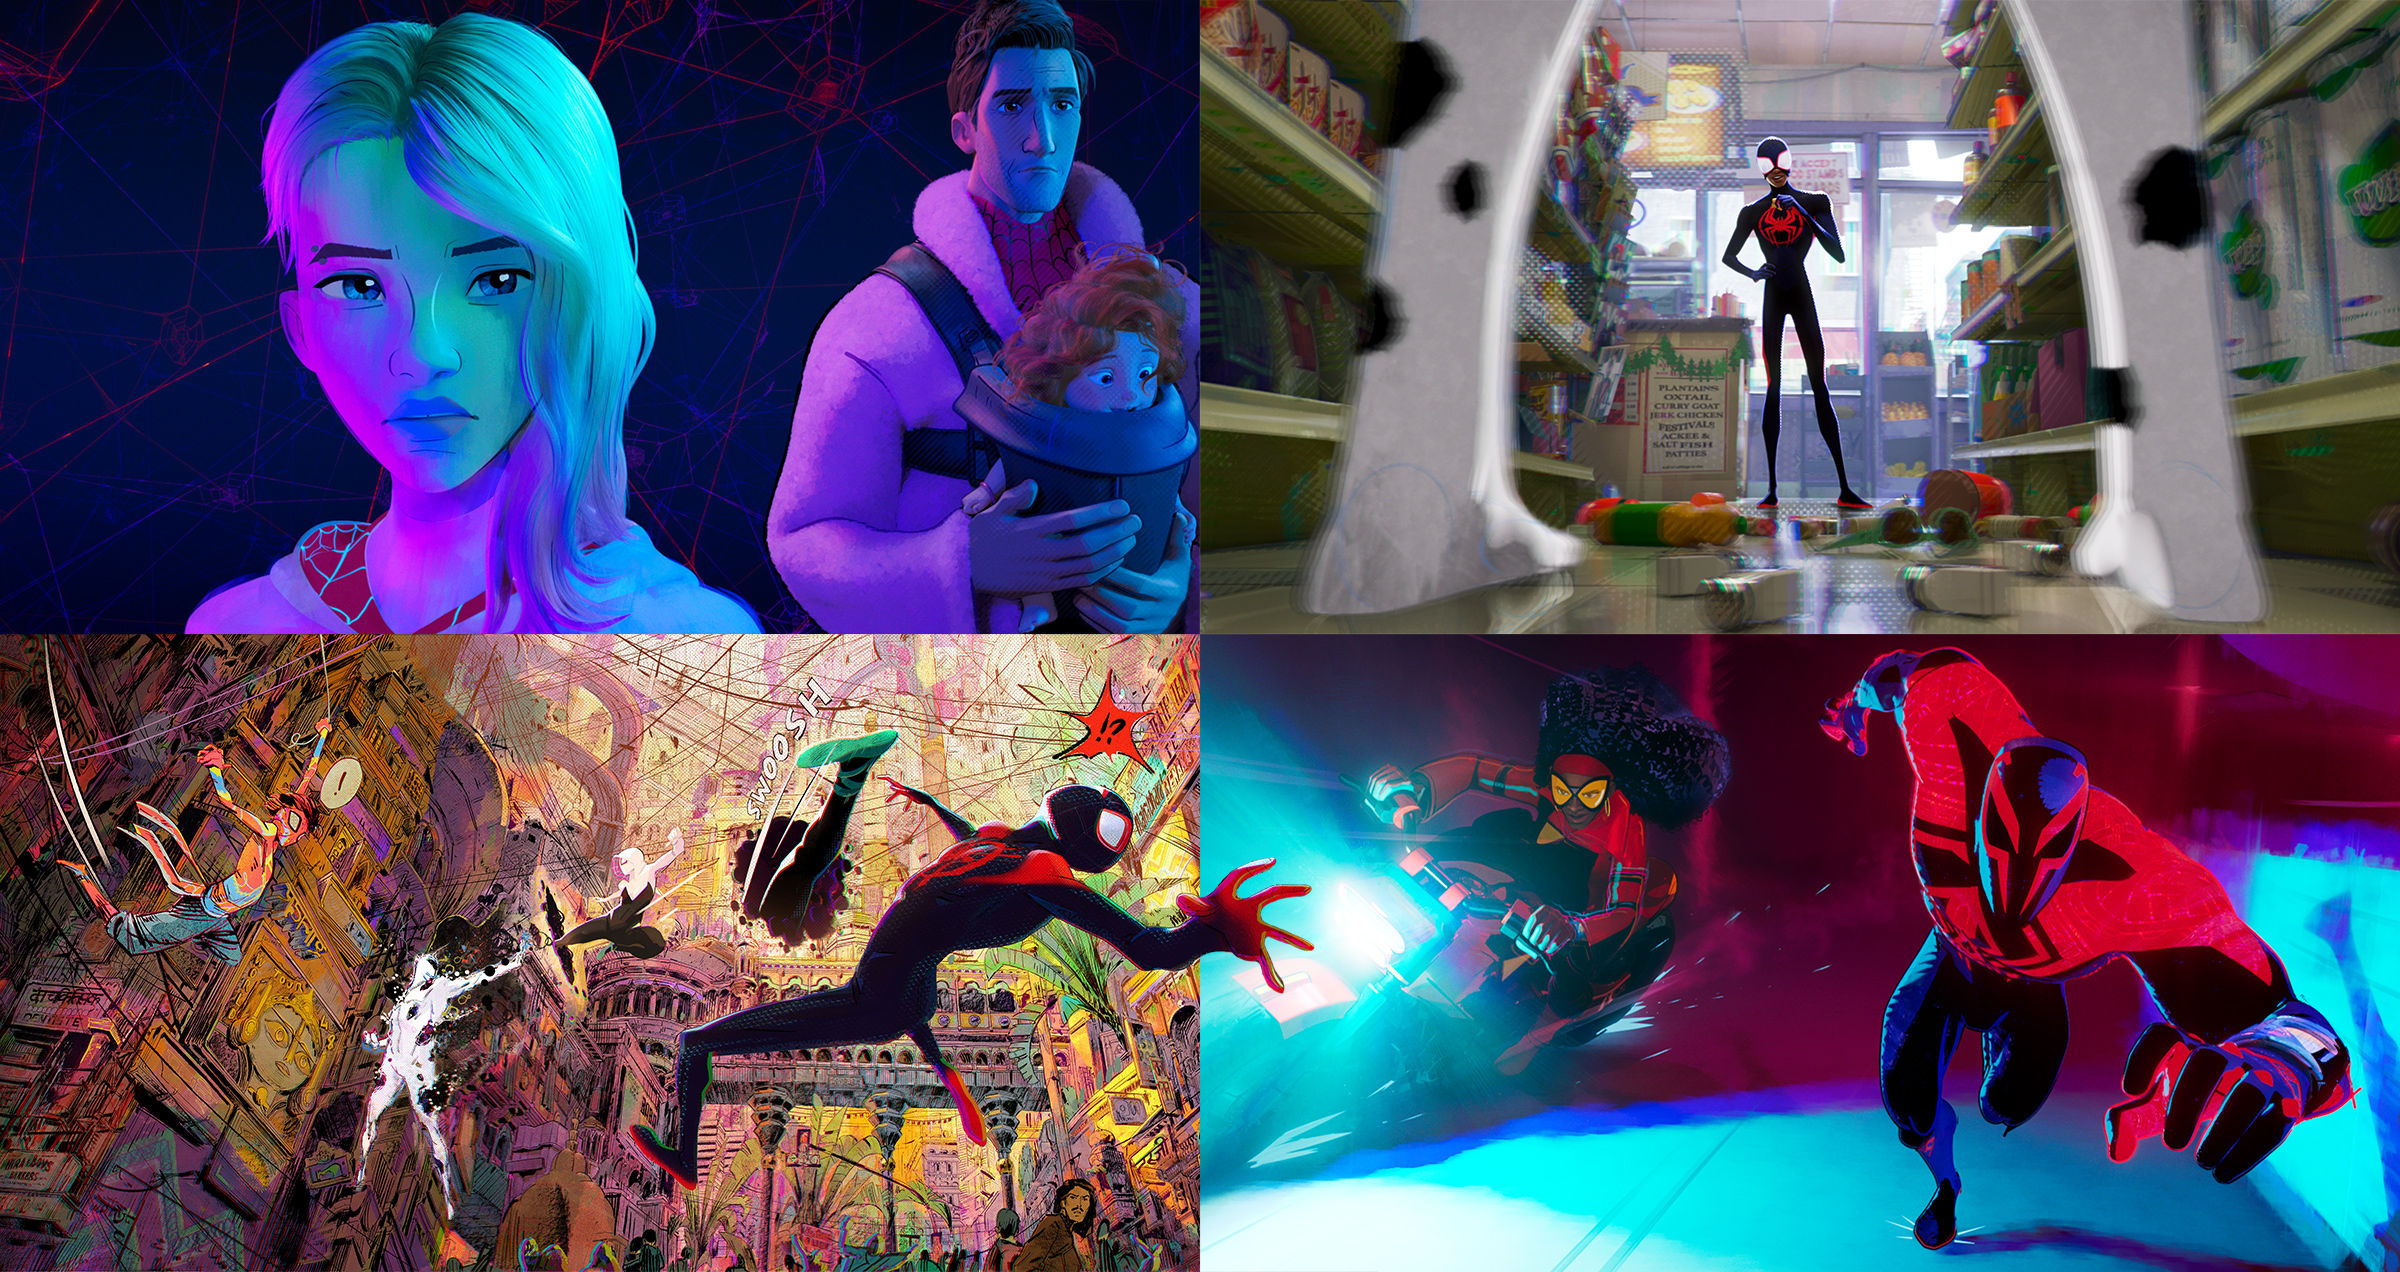 From top left, clockwise: Gwen Stacy (Hailee Steinfeld), Peter B. Parker (Jake Johnson) and his daughter Mayday; Miles Morales as Spider-Man (Shameik Moore); Jessica Drew (Issa Rae) and Miguel O’ Hara (Oscar Isaac); Pavitr Prabhakar (Karan Soni), Gwen Stacy and Miles Morales. (Sony Pictures Animation (4))